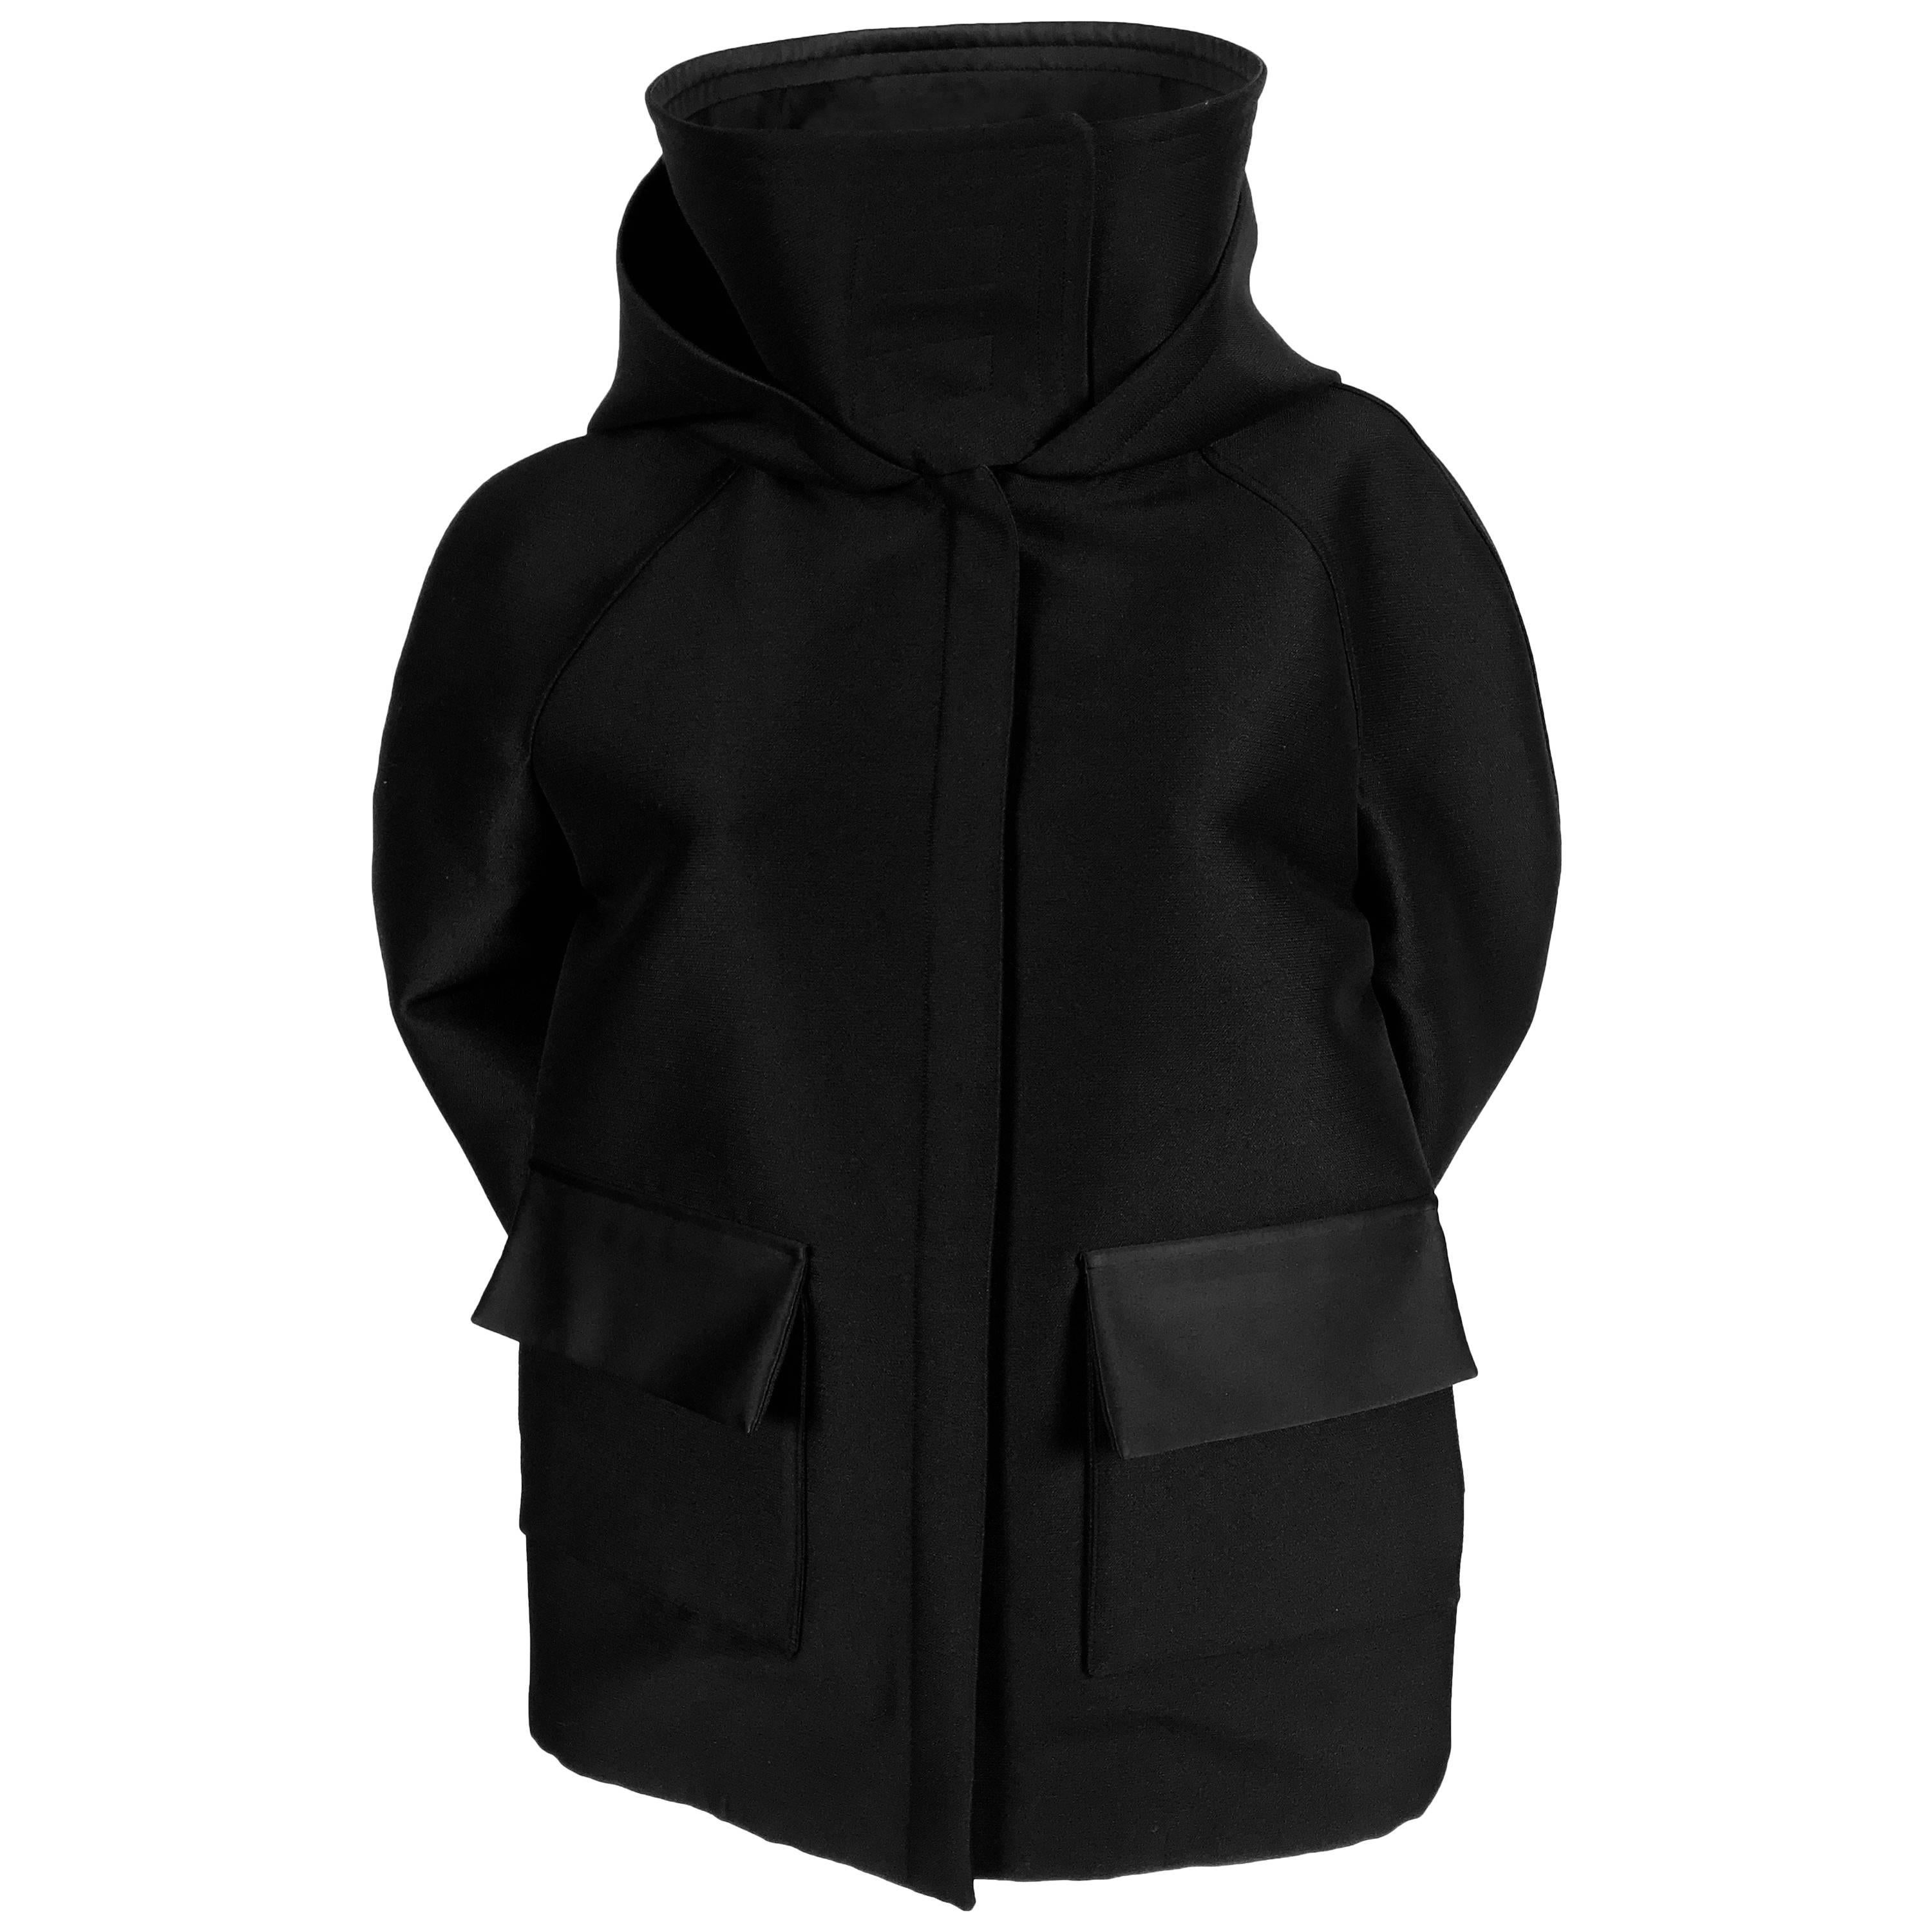 CELINE by PHOEBE PHILO black hooded jacket with satin accents